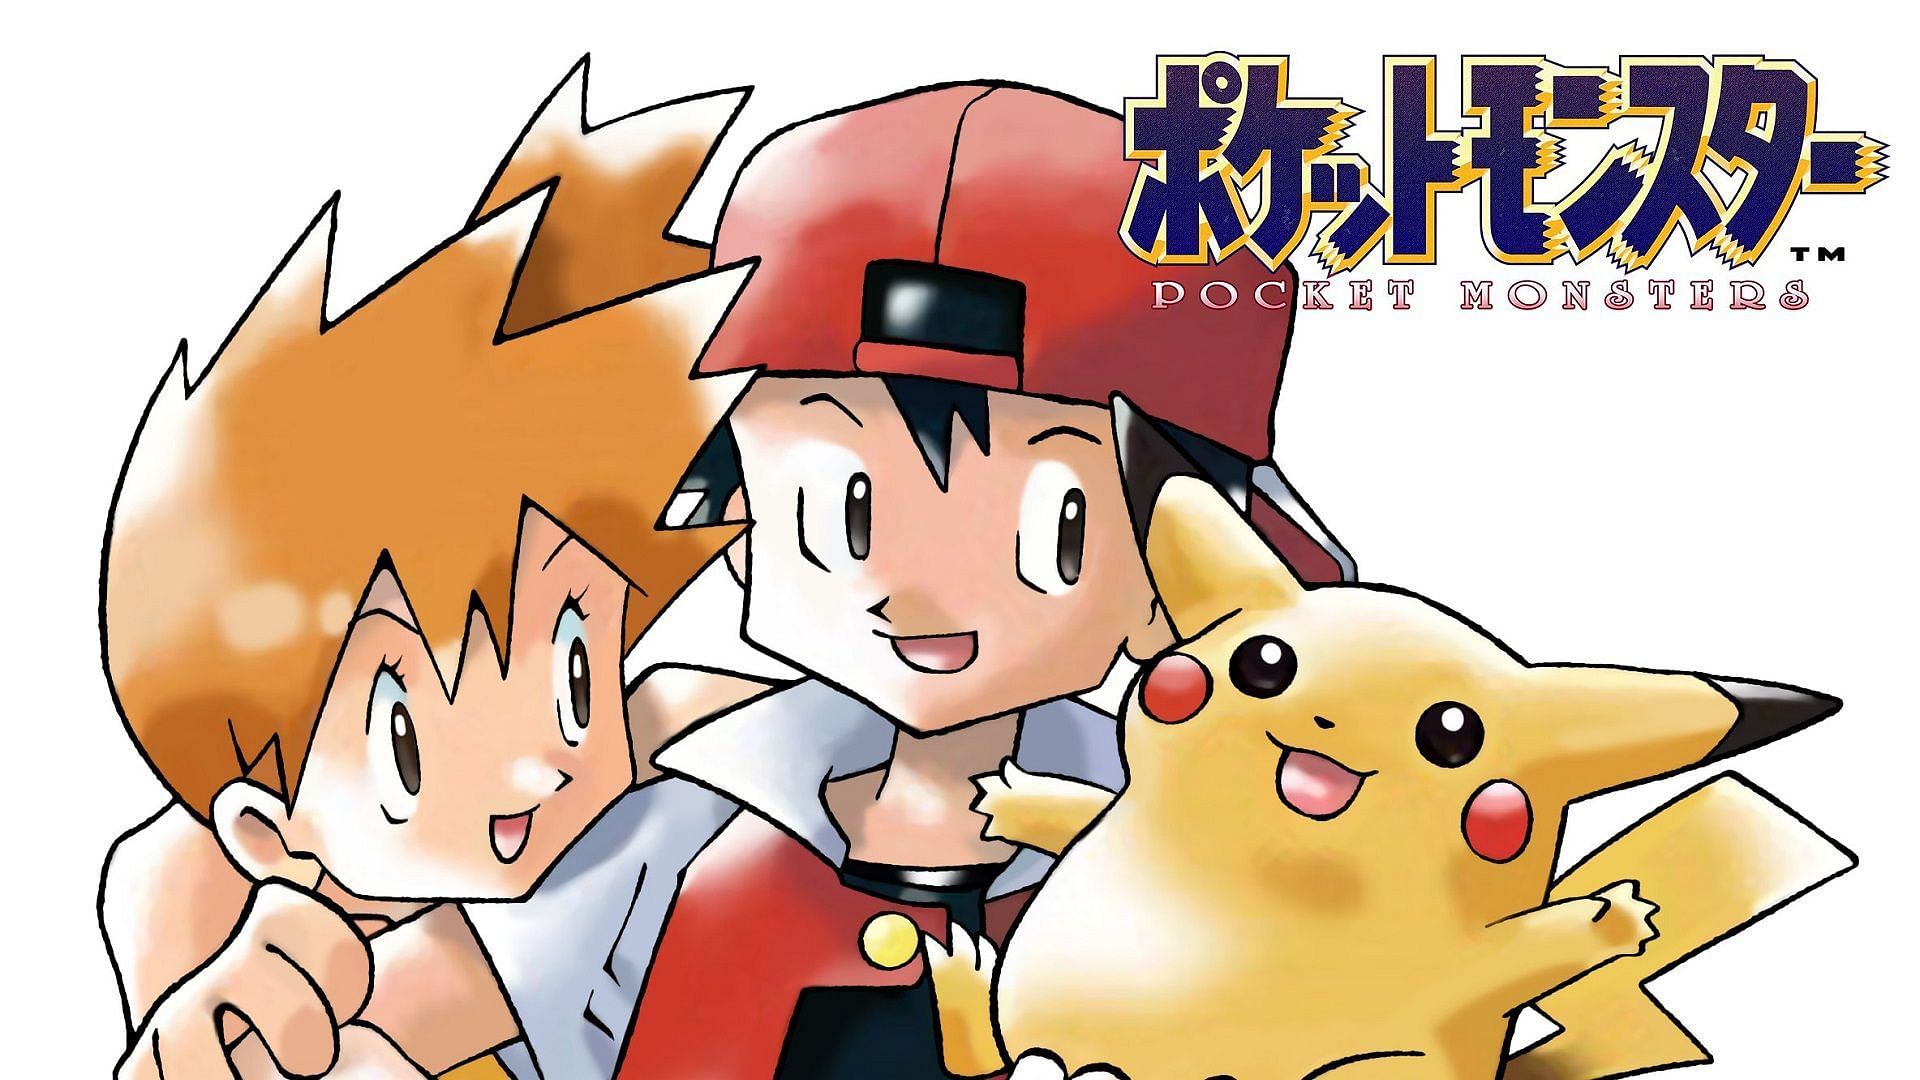 Red, Pikachu, and Misty in official artwork by Ken Sugimori (Image via Game Freak)